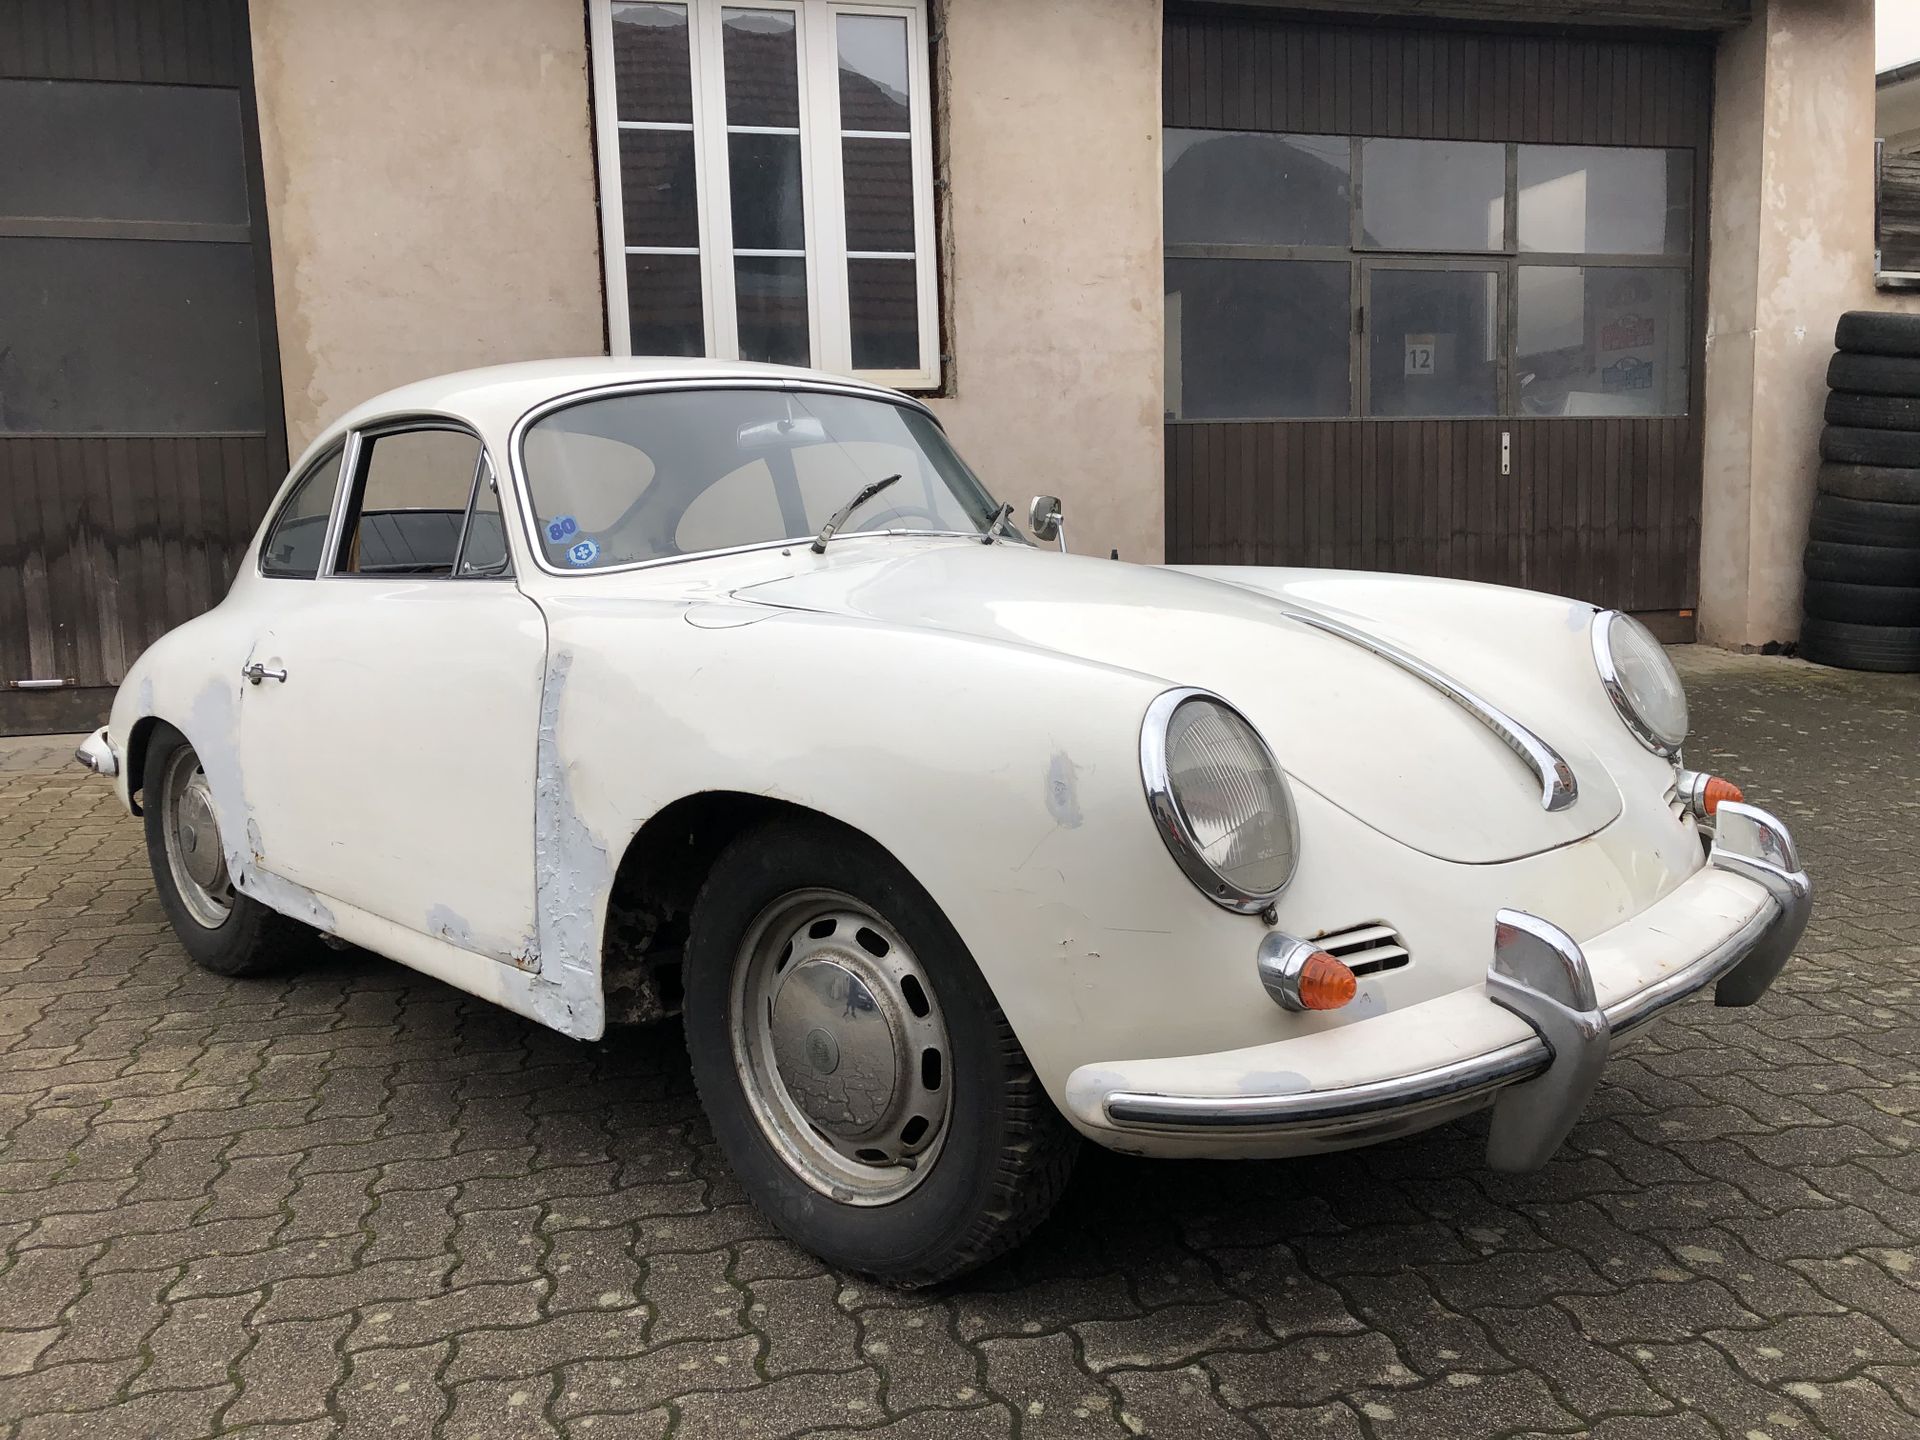 1964 Porsche 356 C 1600 Serial number: 130870

Engine number: 732438

French CG &hellip;